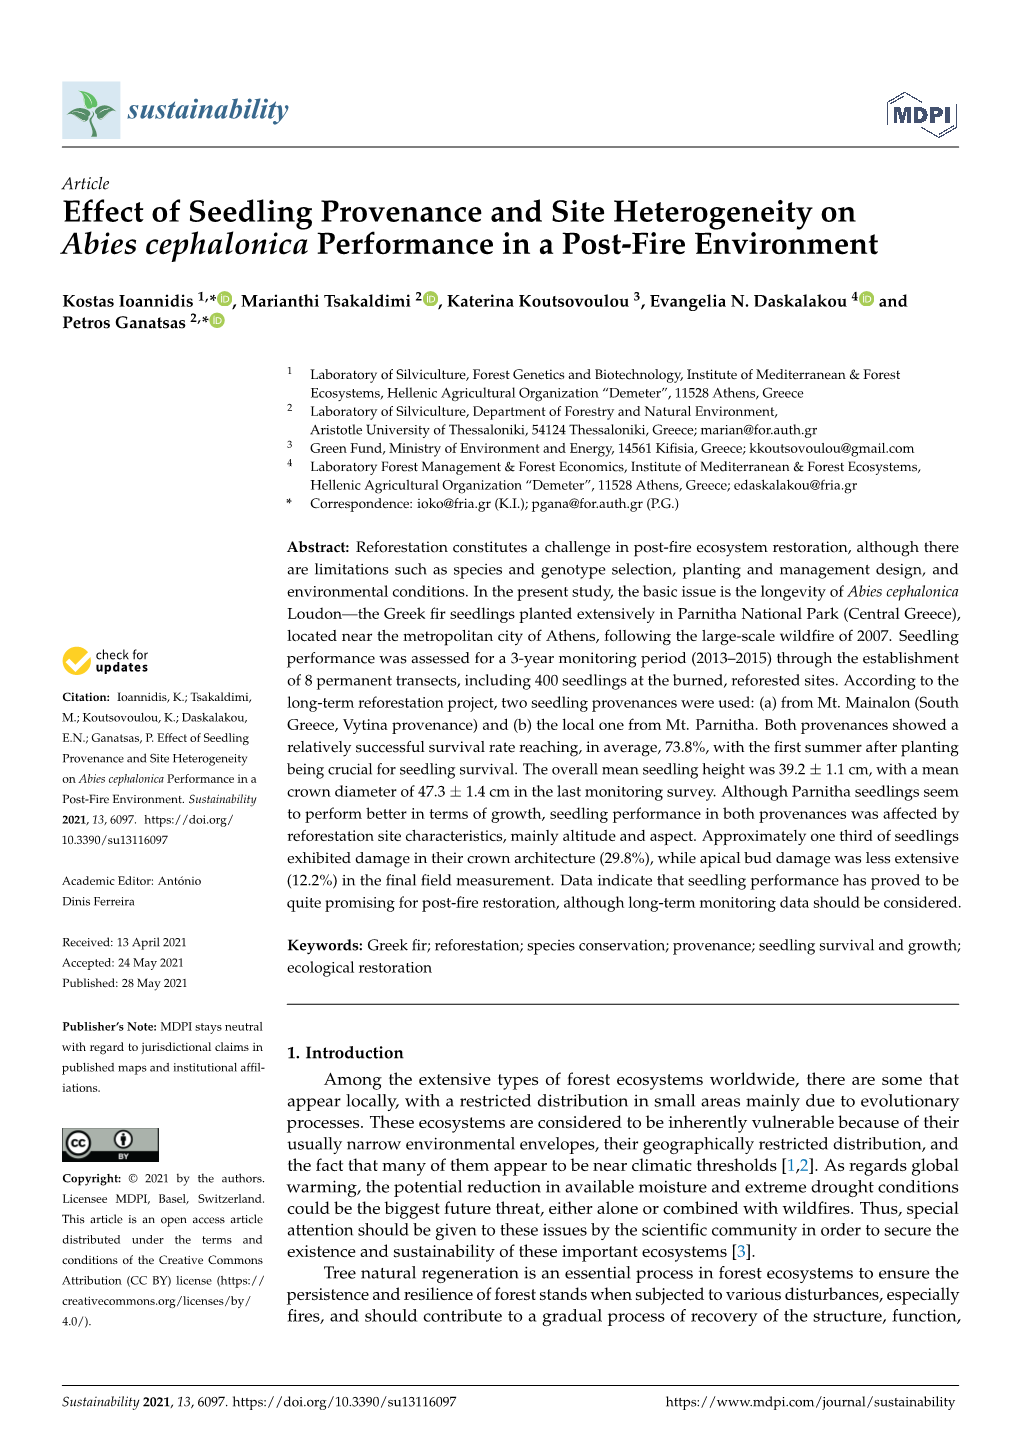 Effect of Seedling Provenance and Site Heterogeneity on Abies Cephalonica Performance in a Post-Fire Environment